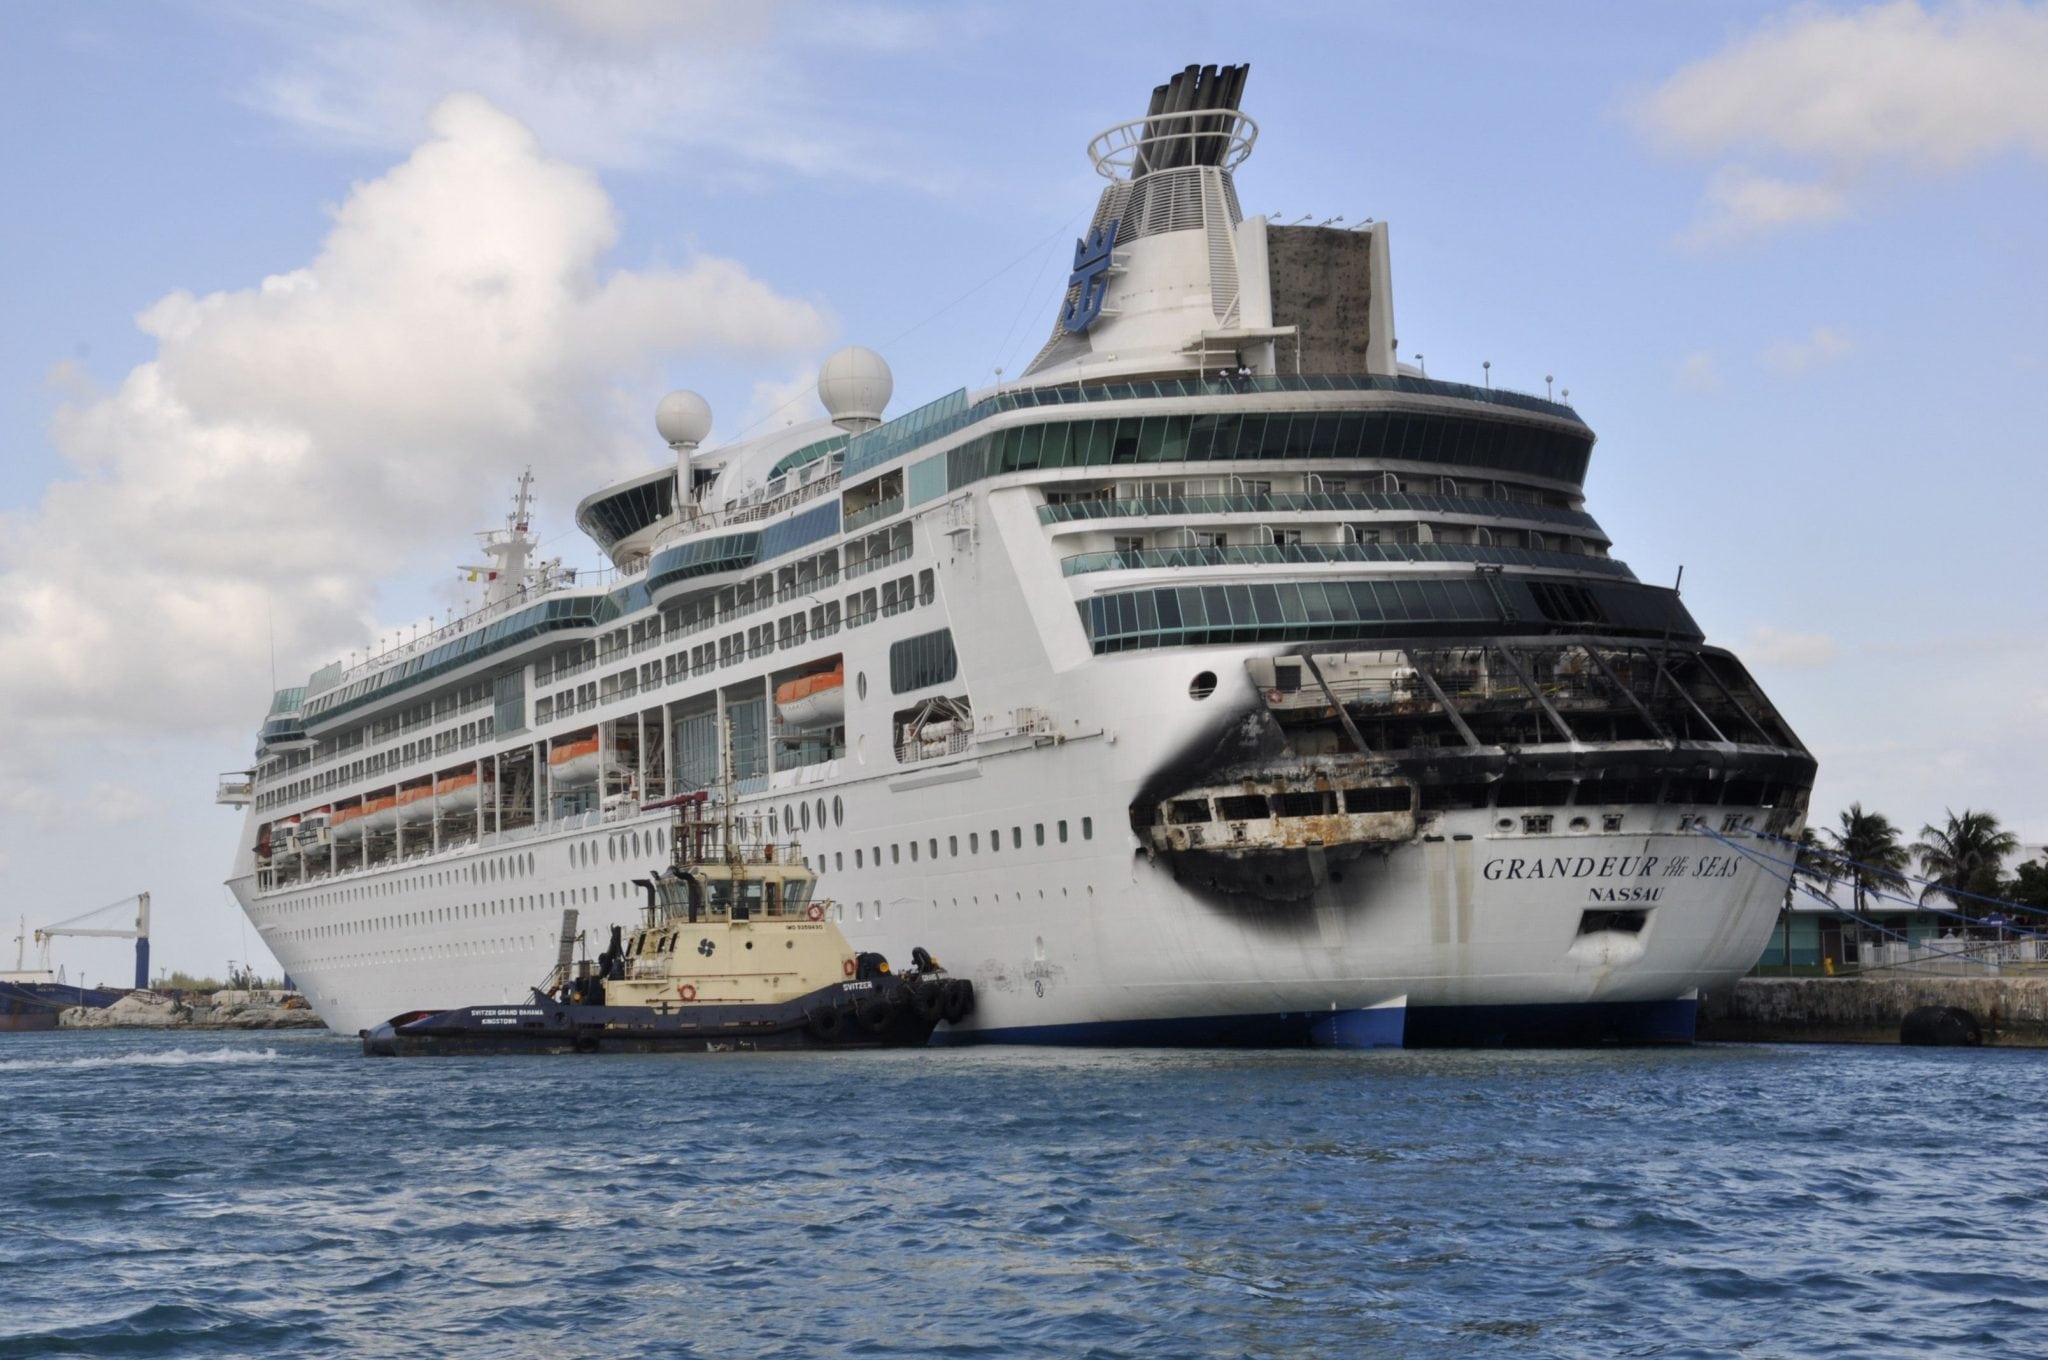 Damage on the Royal Caribbean ship Grandeur of the Seas is pictured as the ship is docked in Freeport. 